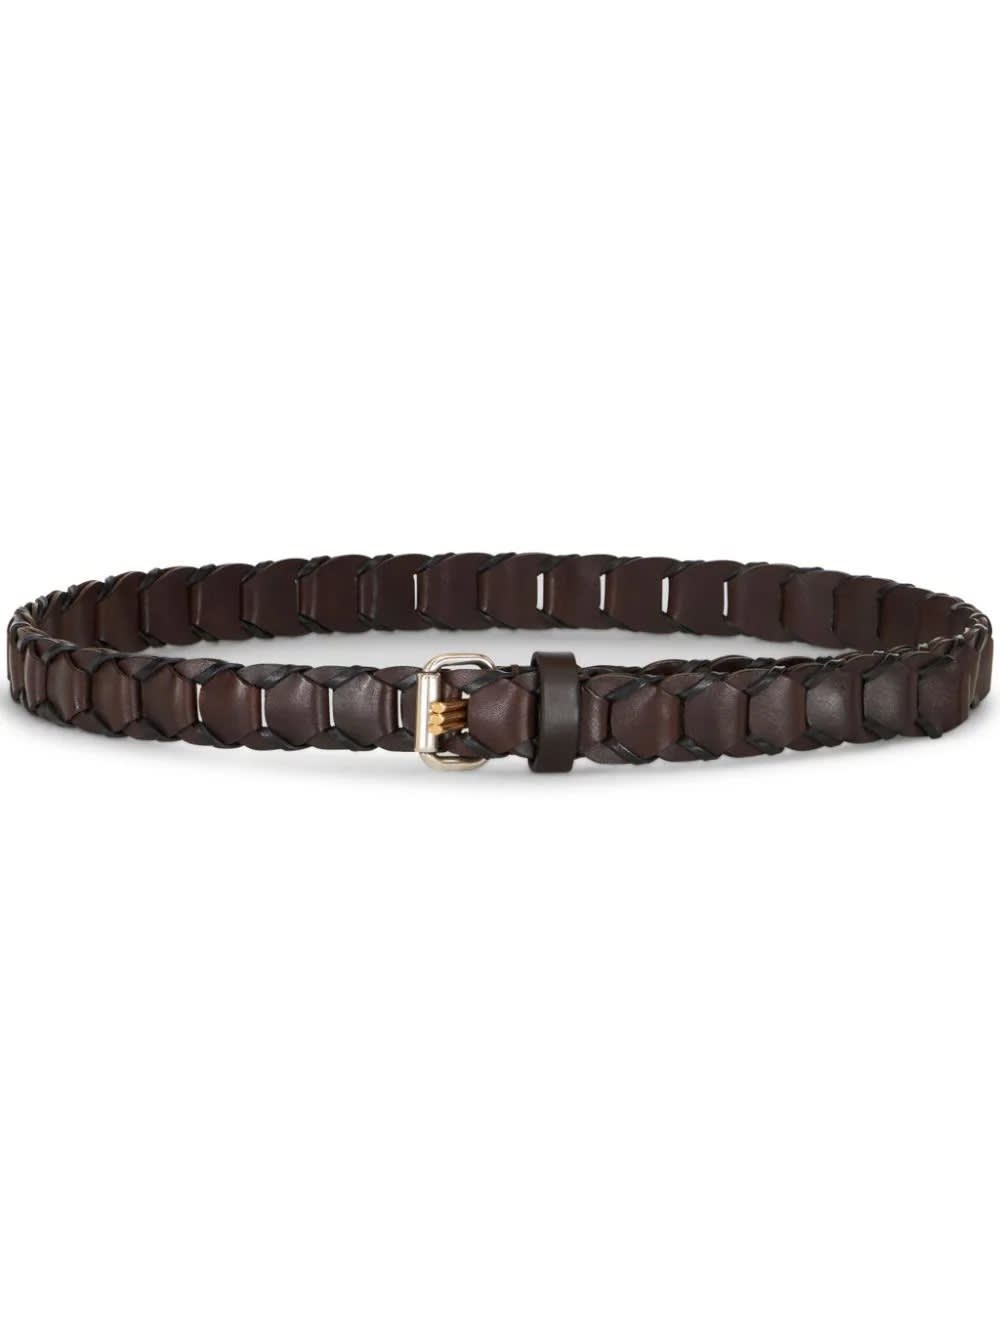 ETRO BROWN WOVEN LEATHER BELT